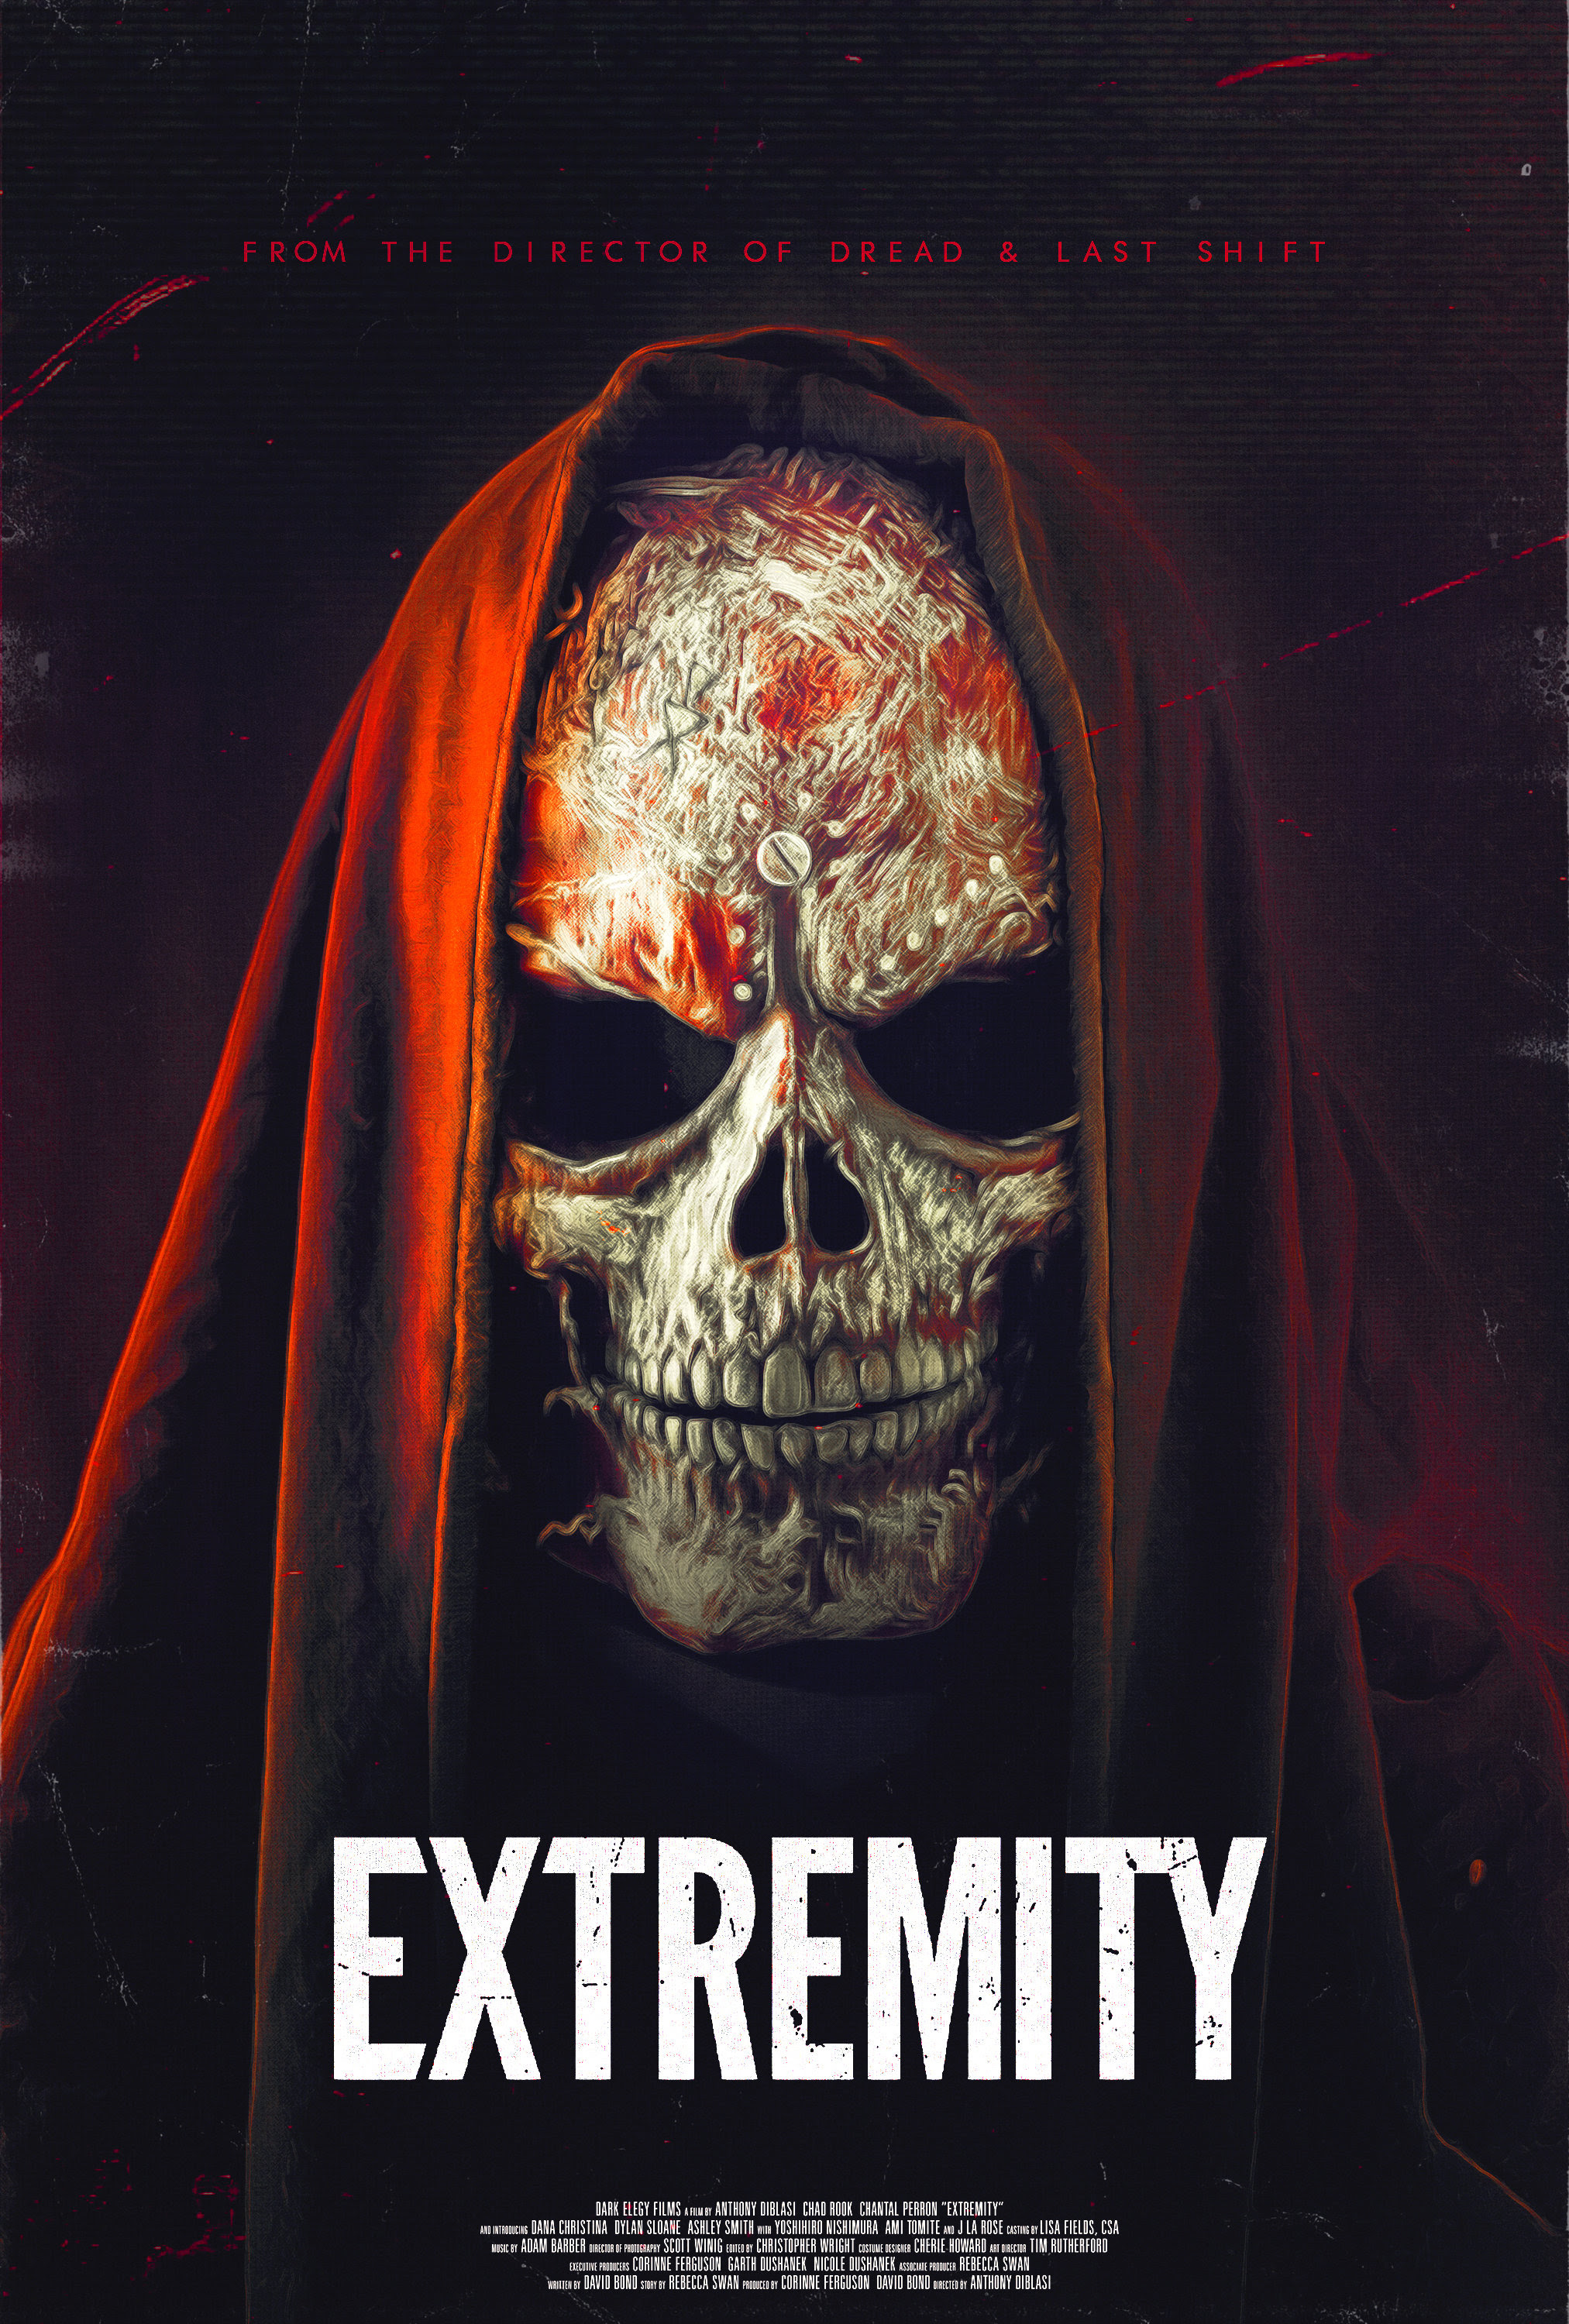 Extremity film review: a horror experience gets under the skin